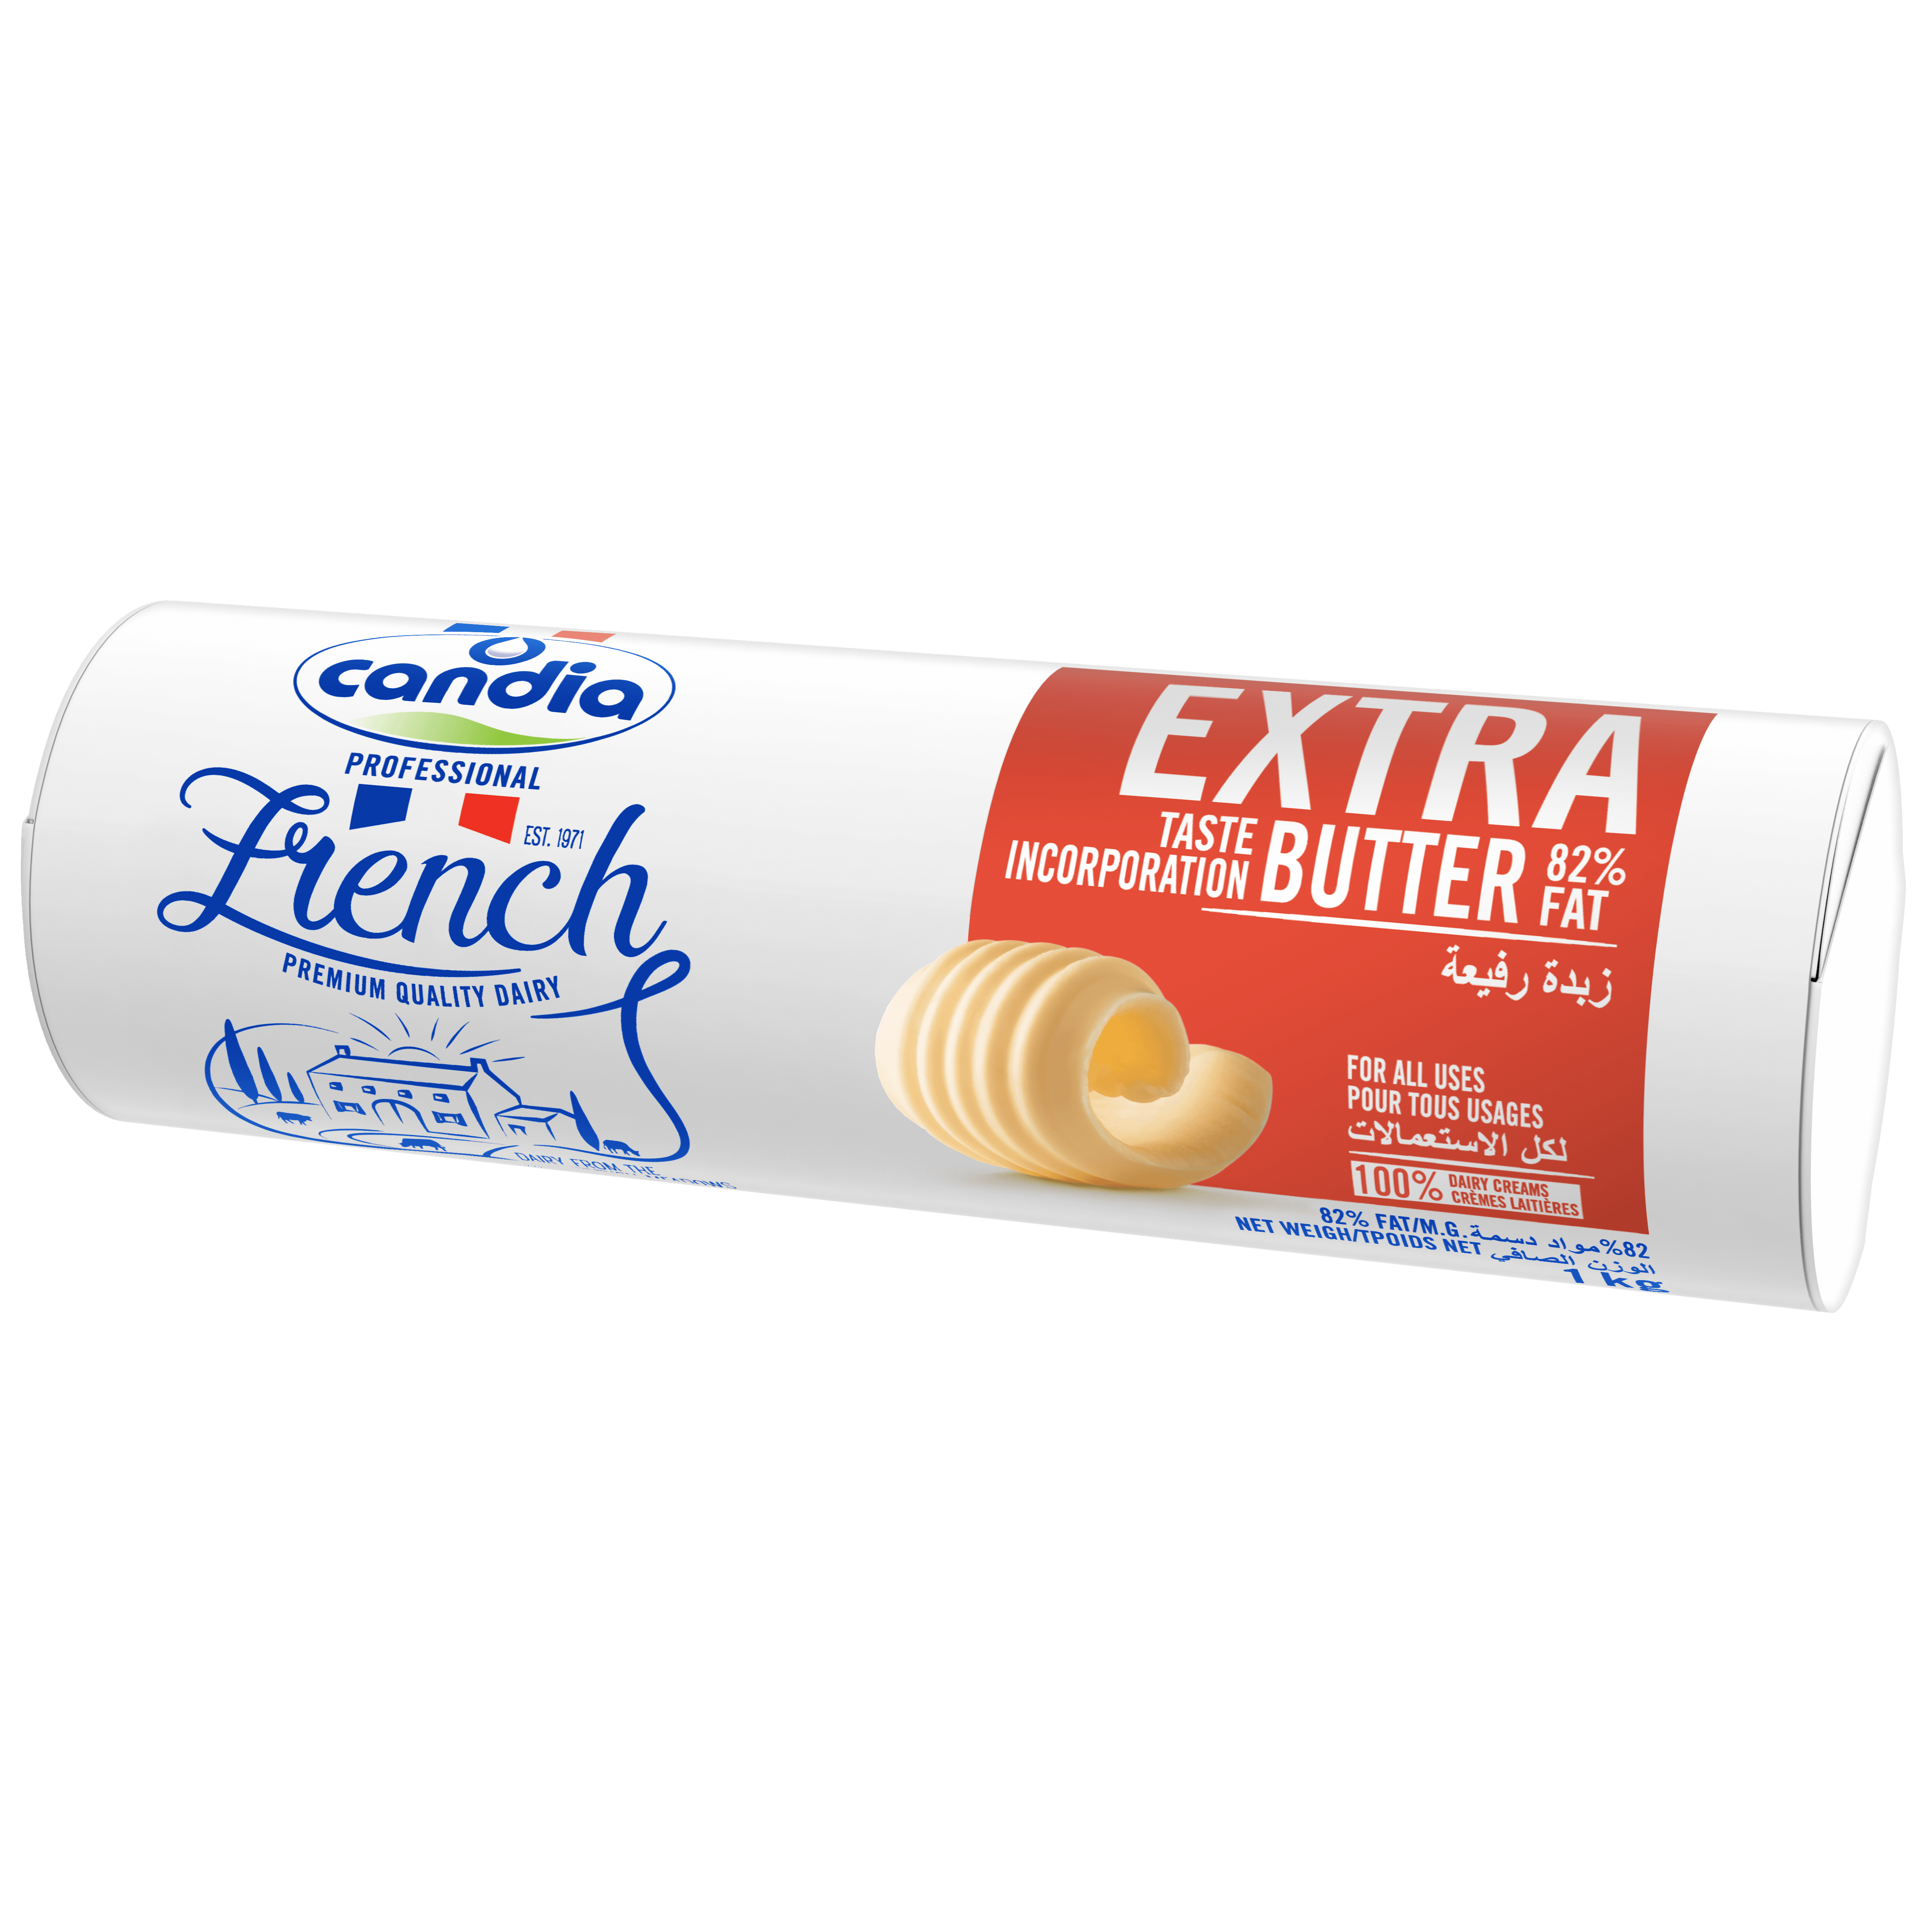 EXTRA TASTE INCORPORATION BUTTER